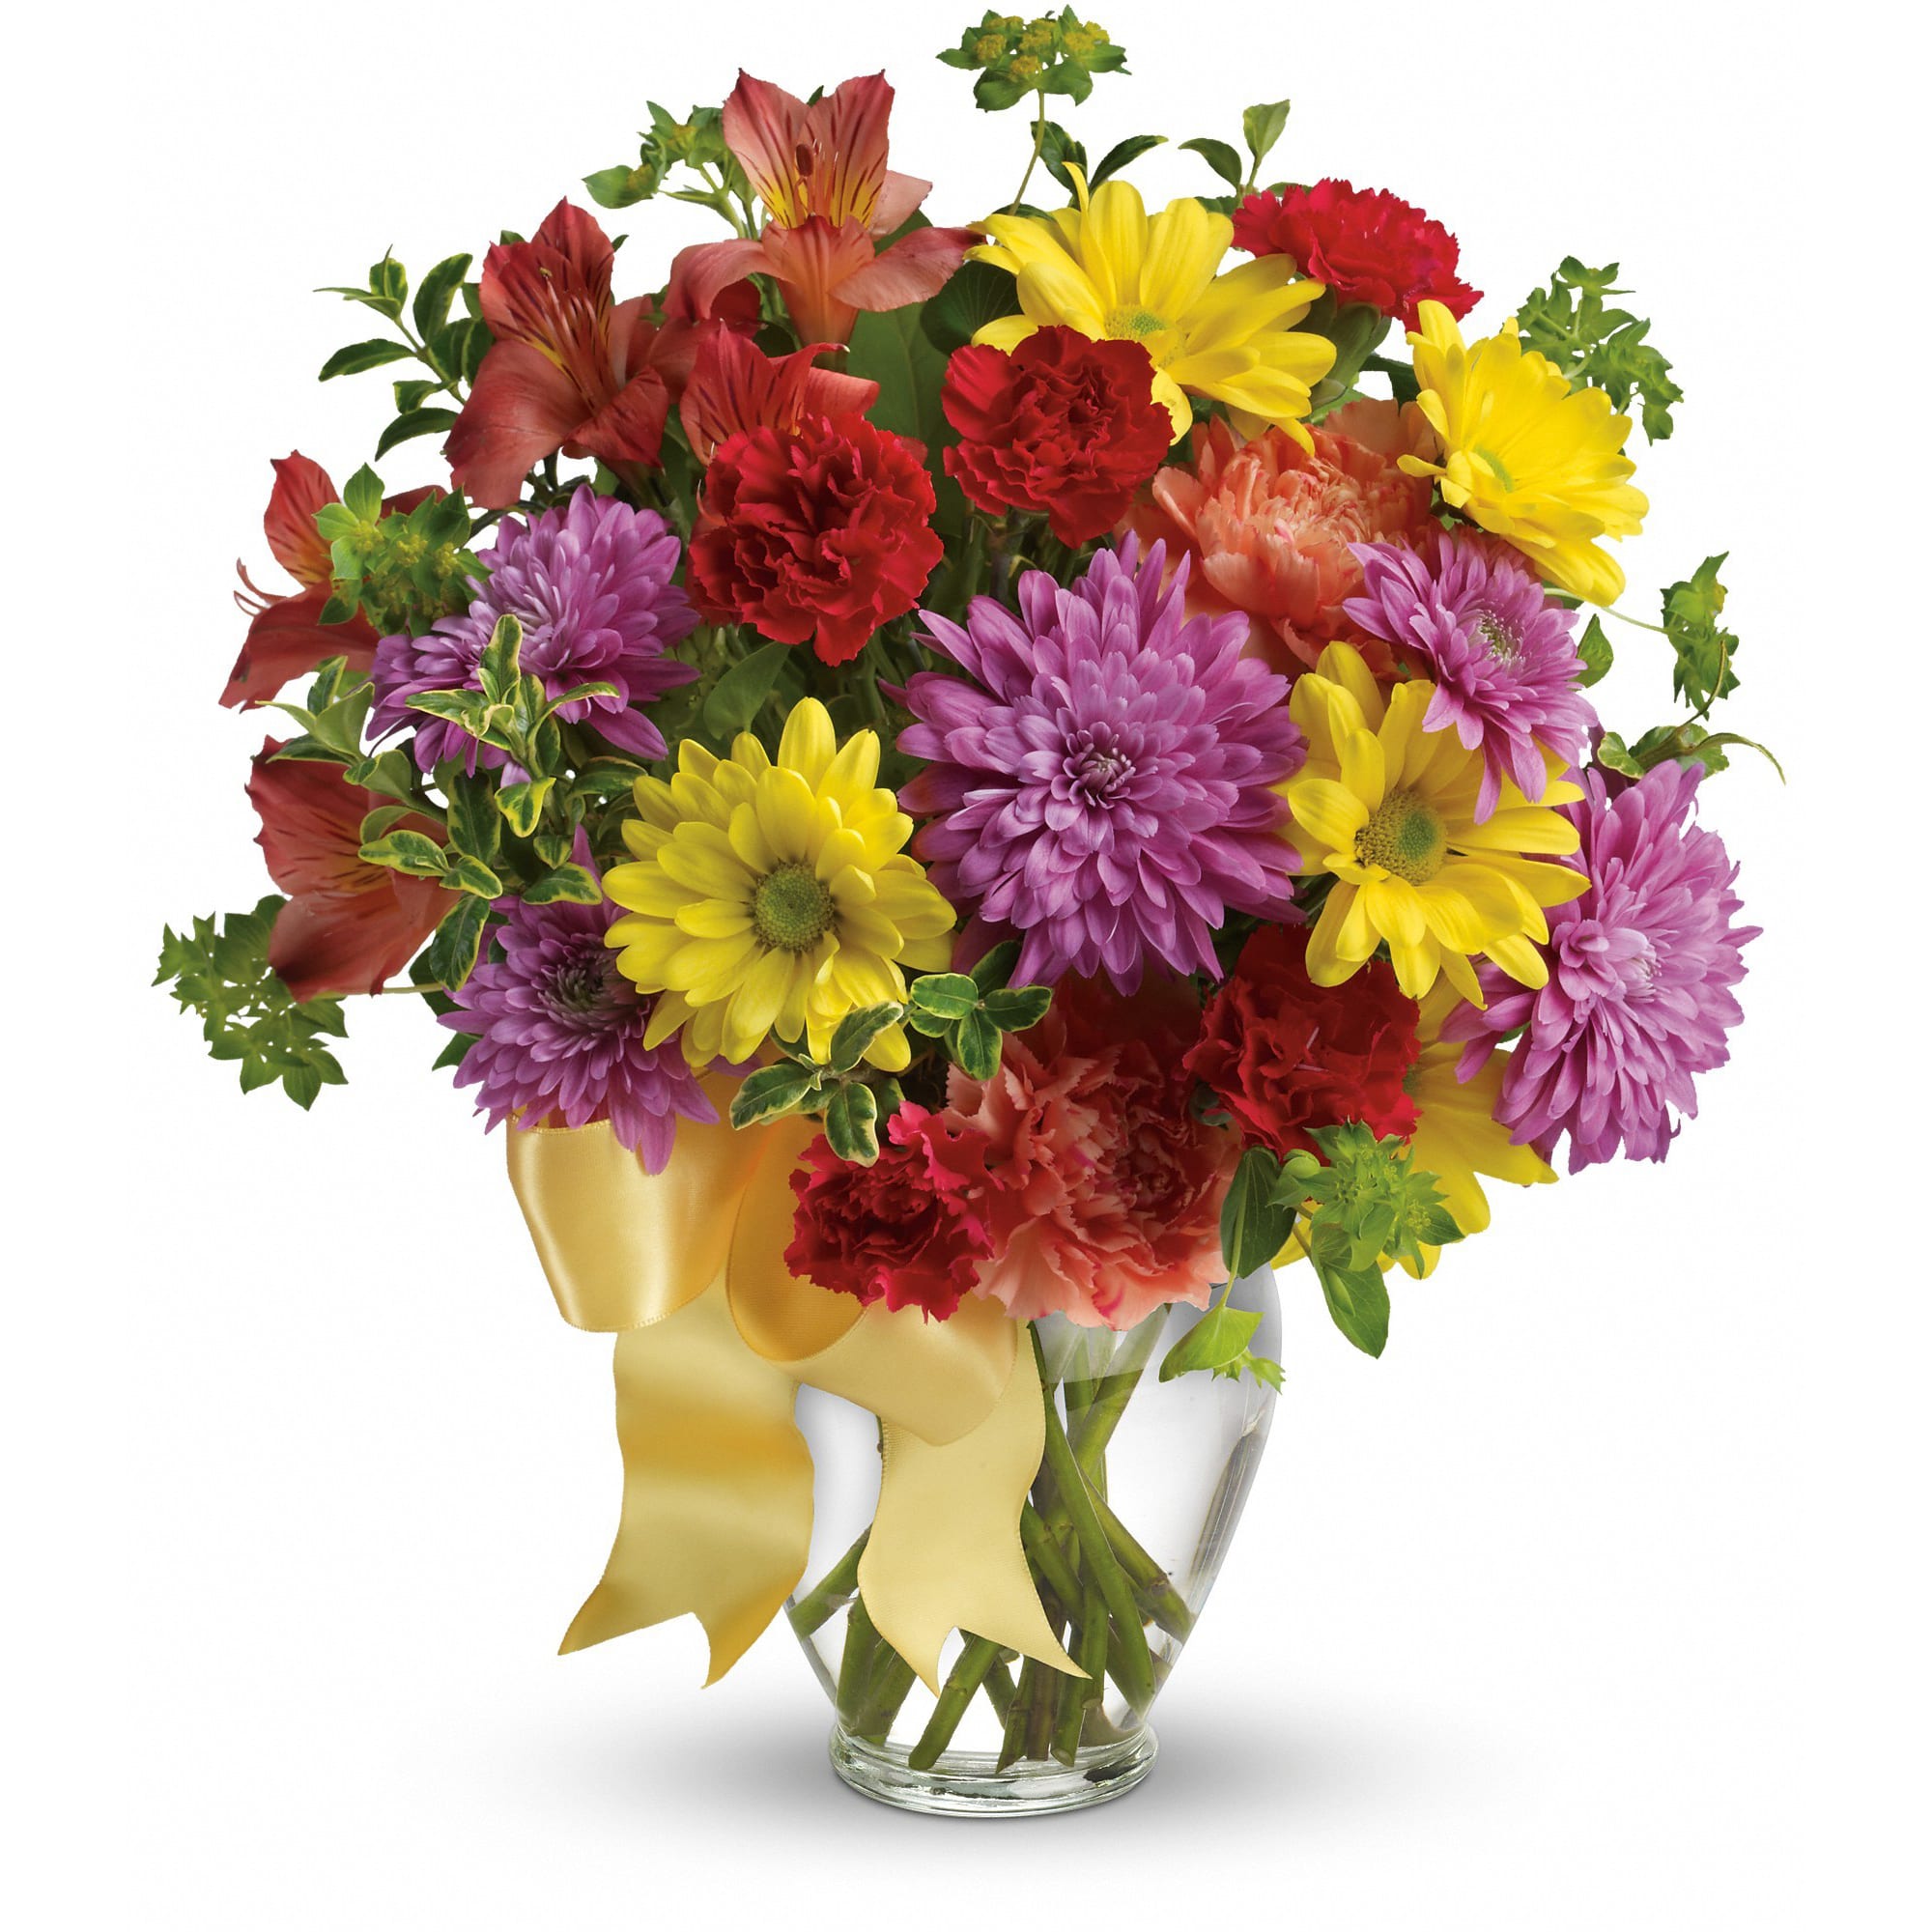 Color Me Yours - Color her overjoyed when this beautiful bouquet is delivered to her door! Sunny reds, oranges and yellows create a heartwarming mix to remind her just how special she is.